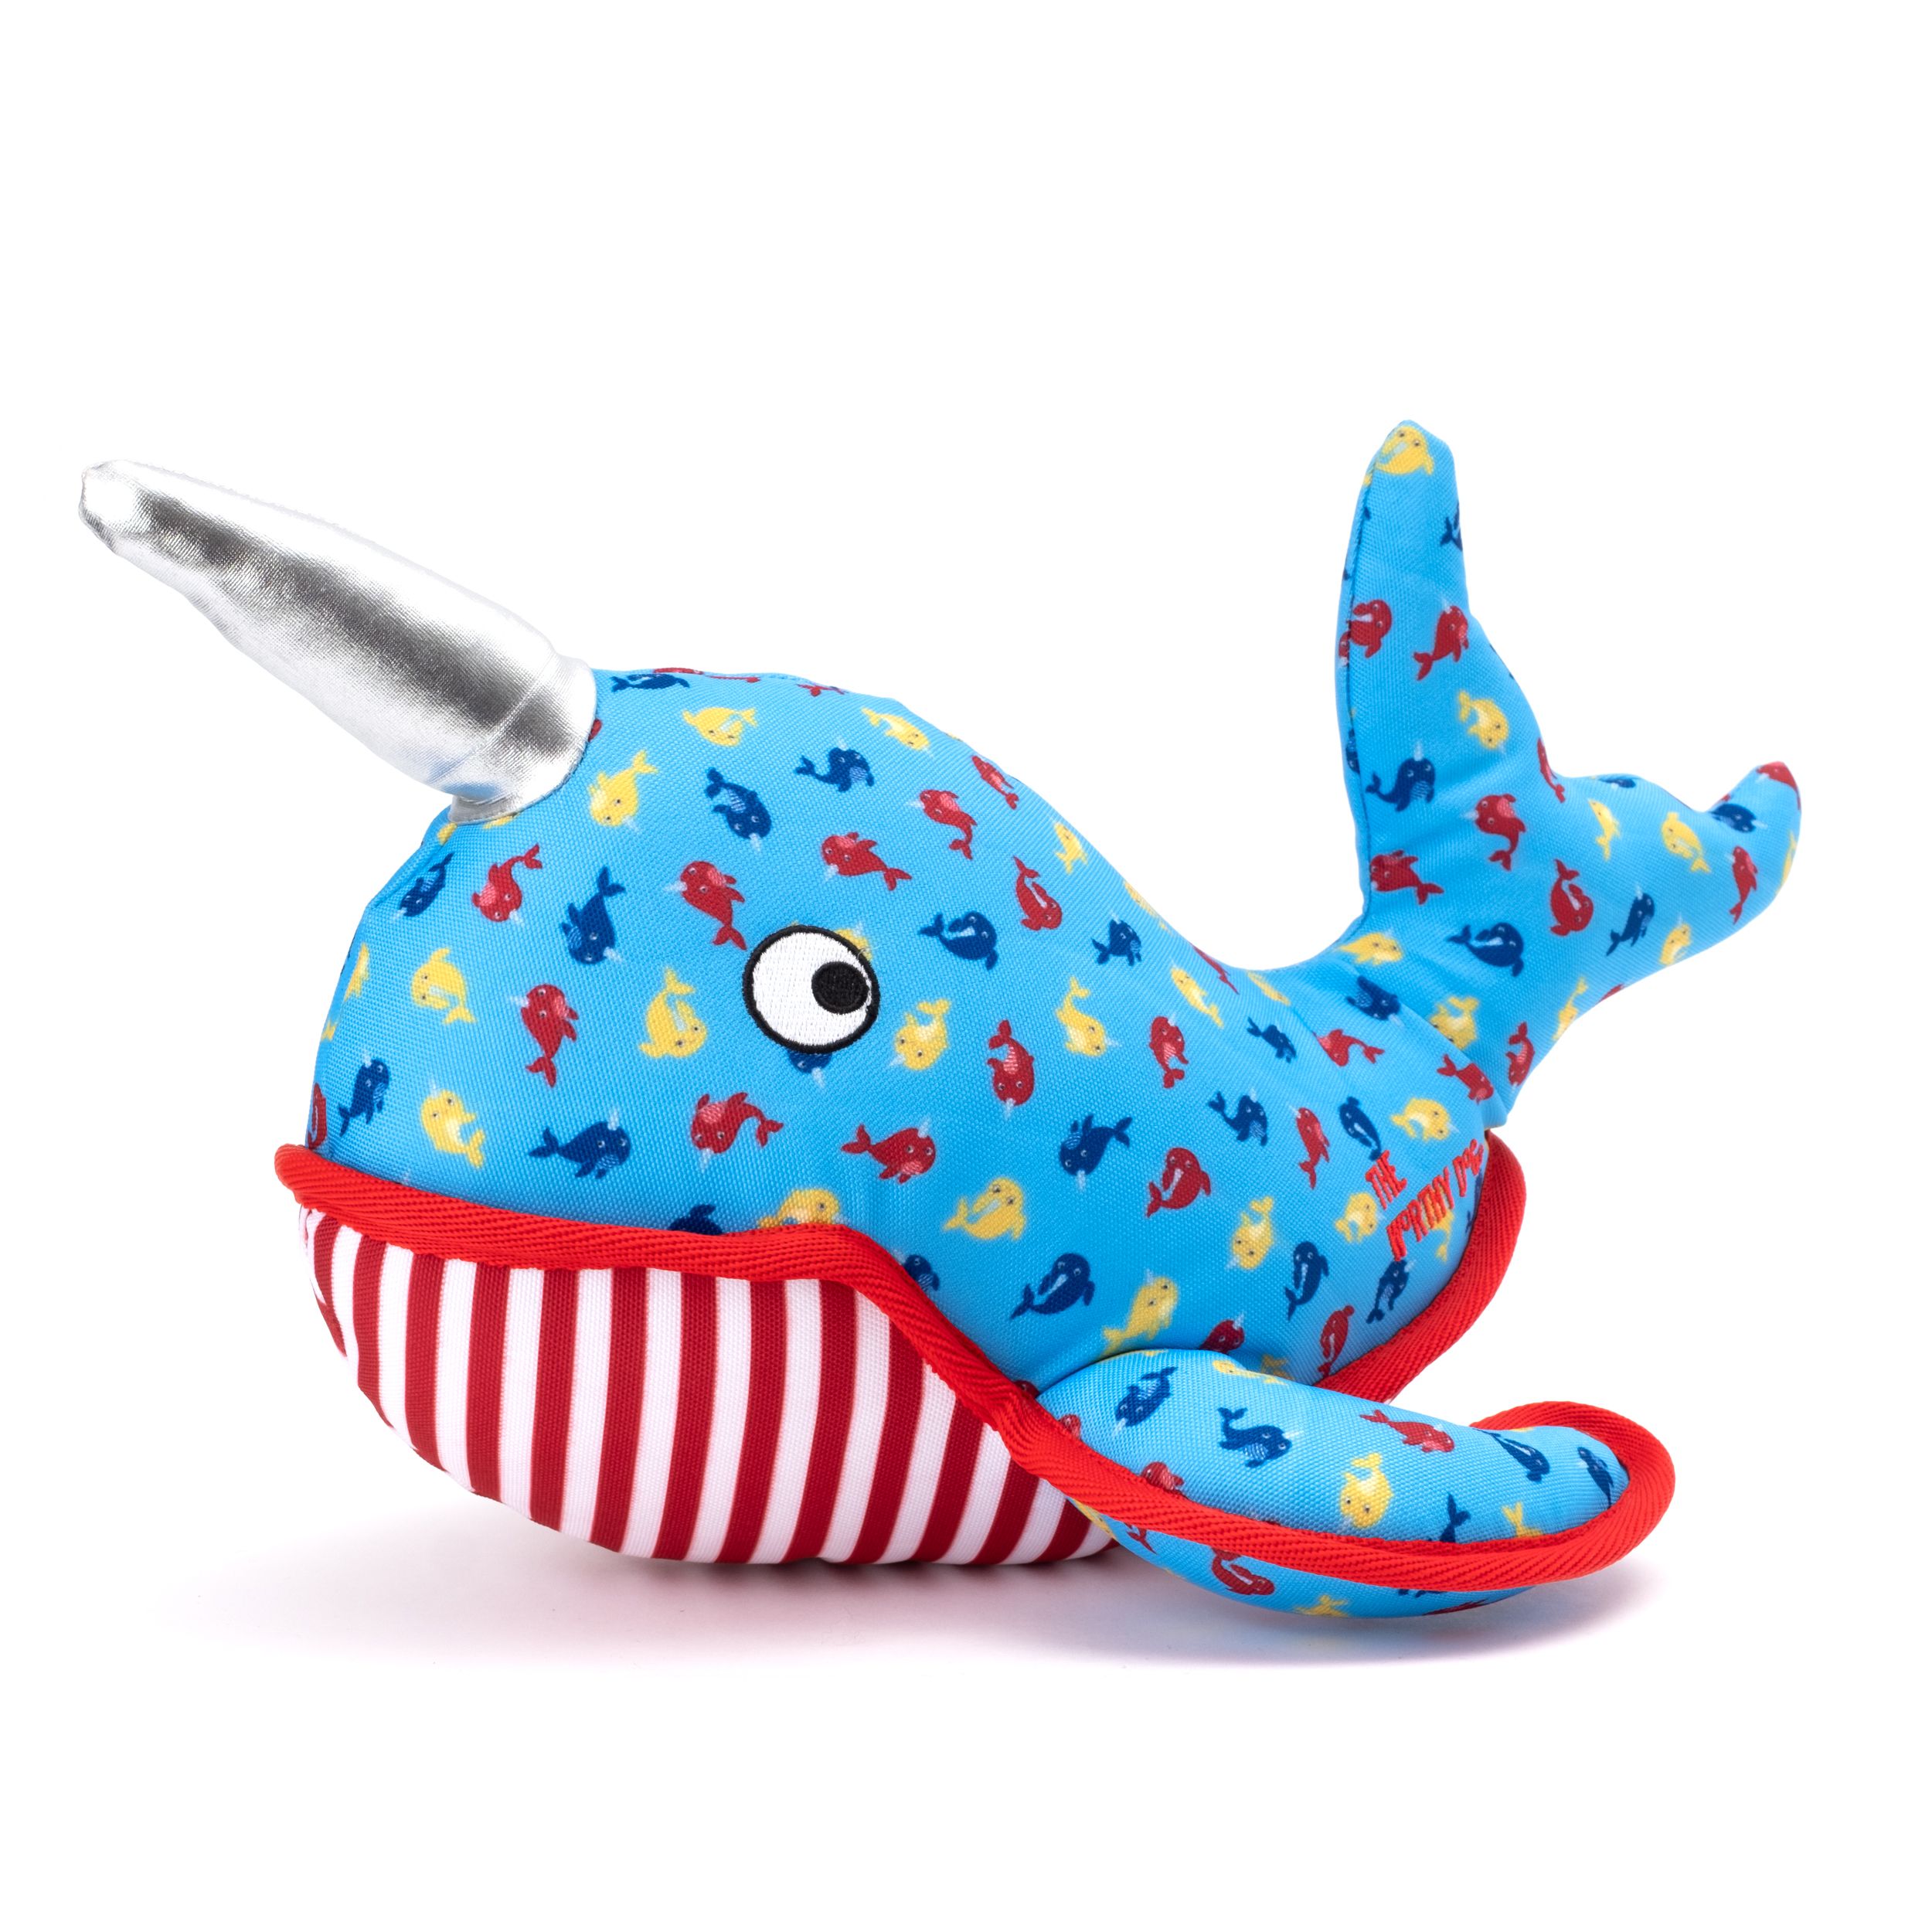 Nelly the Narwhal